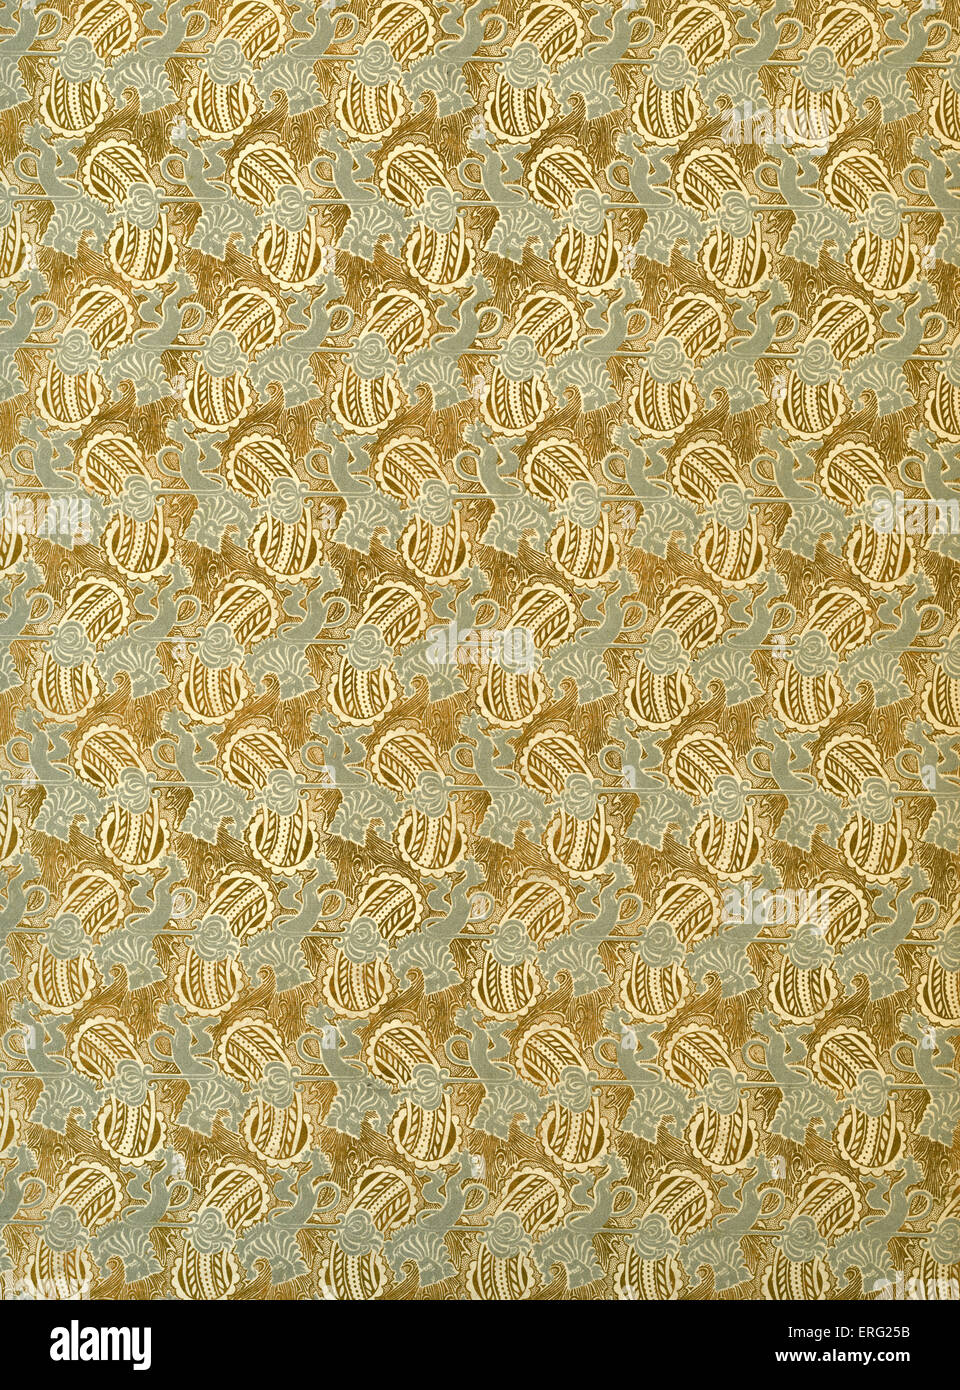 Decorated endpaper with lion rampant motif. From German printers' catalogue, 1902. Stock Photo